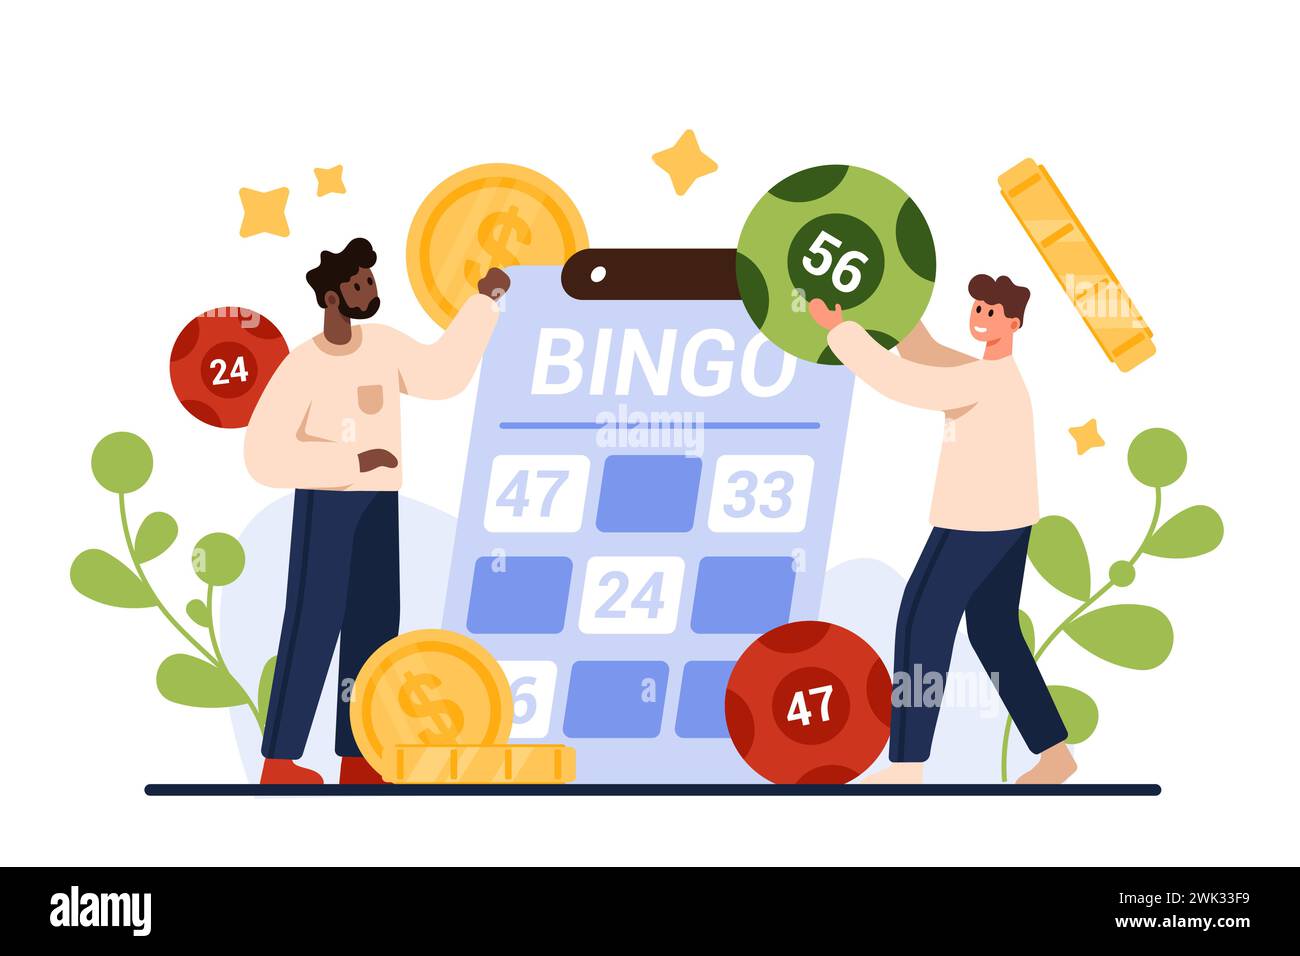 Bingo and lotto game, gambling and leisure casino business. Tiny people play lottery on ticket card for gold coins prize, happy character holding lucky ball with number cartoon vector illustration Stock Vector